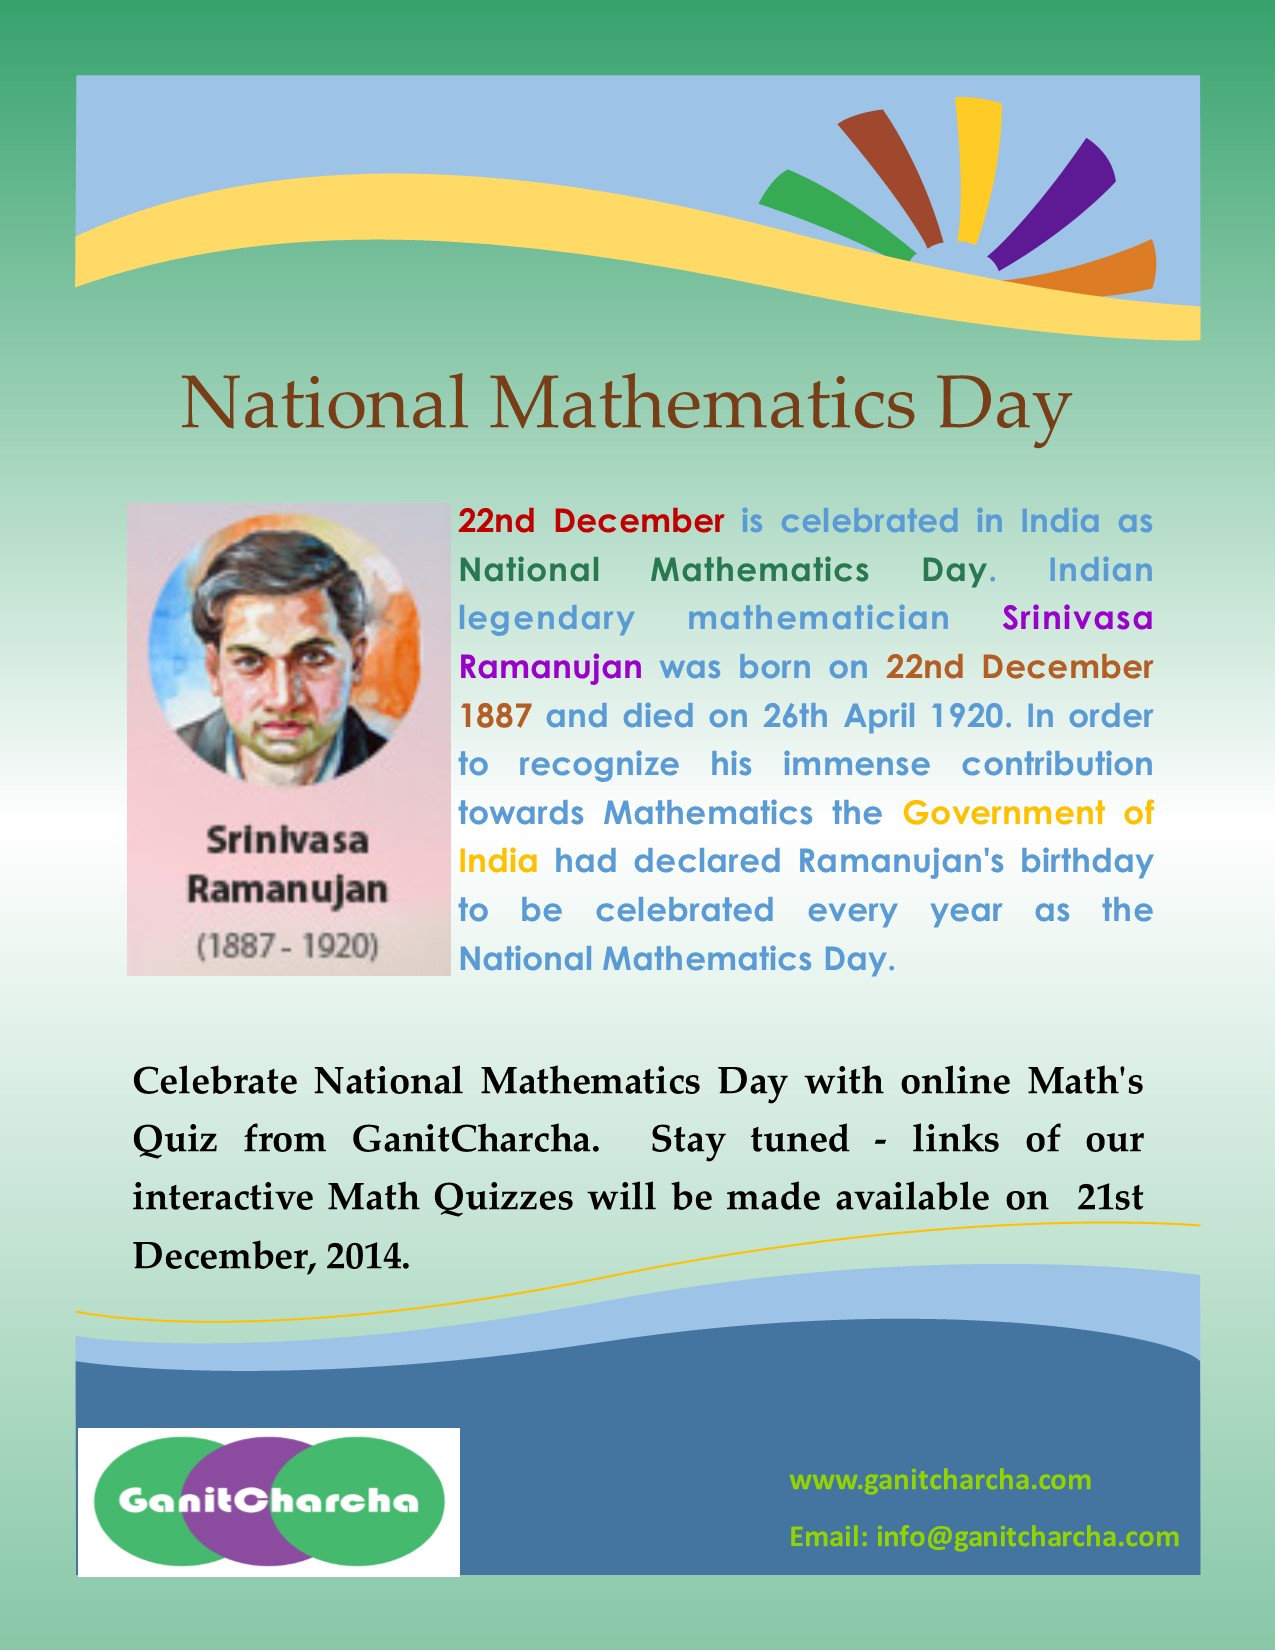 National Mathematics Day of India - 22nd December